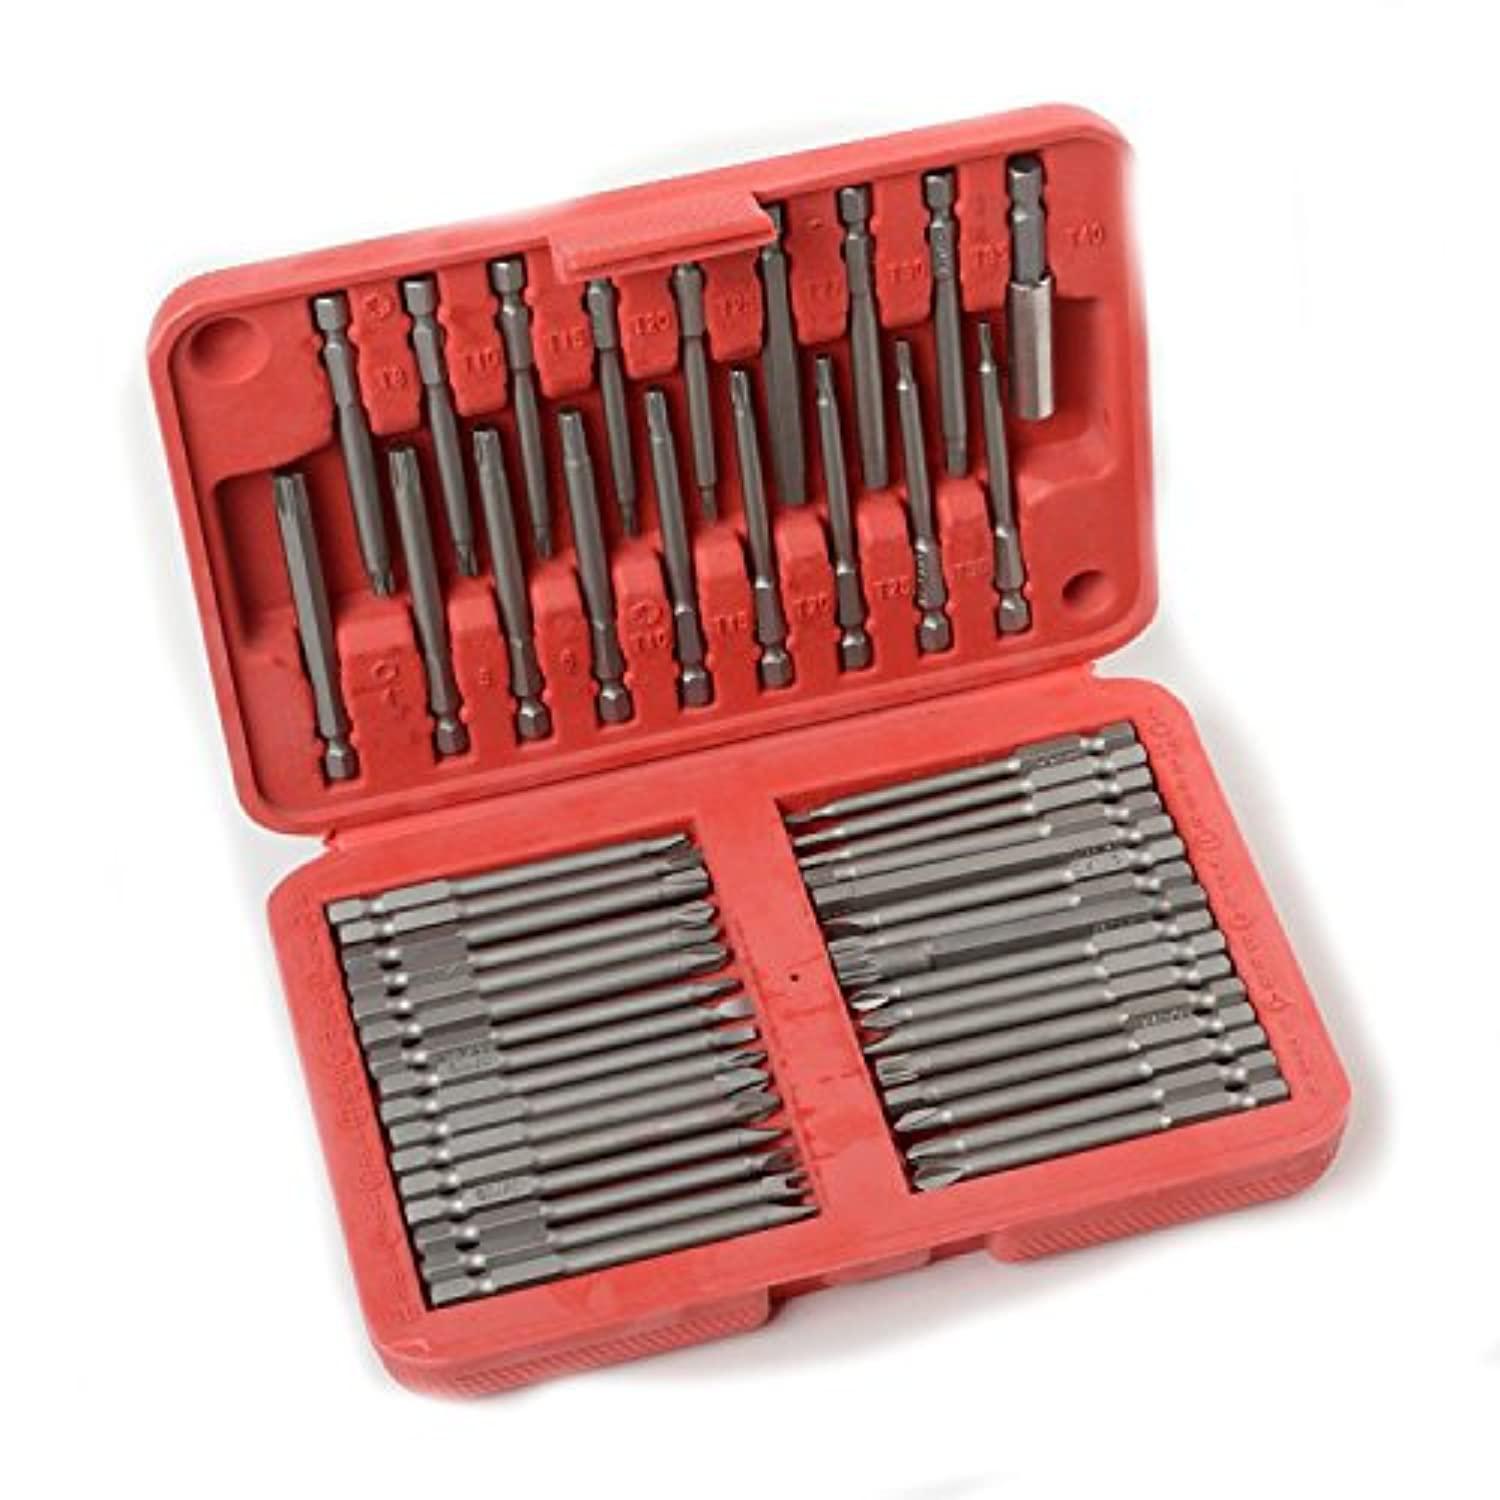 Voyager Tools all in one security bit set torx hex pozidrive bit set 50pc extra long